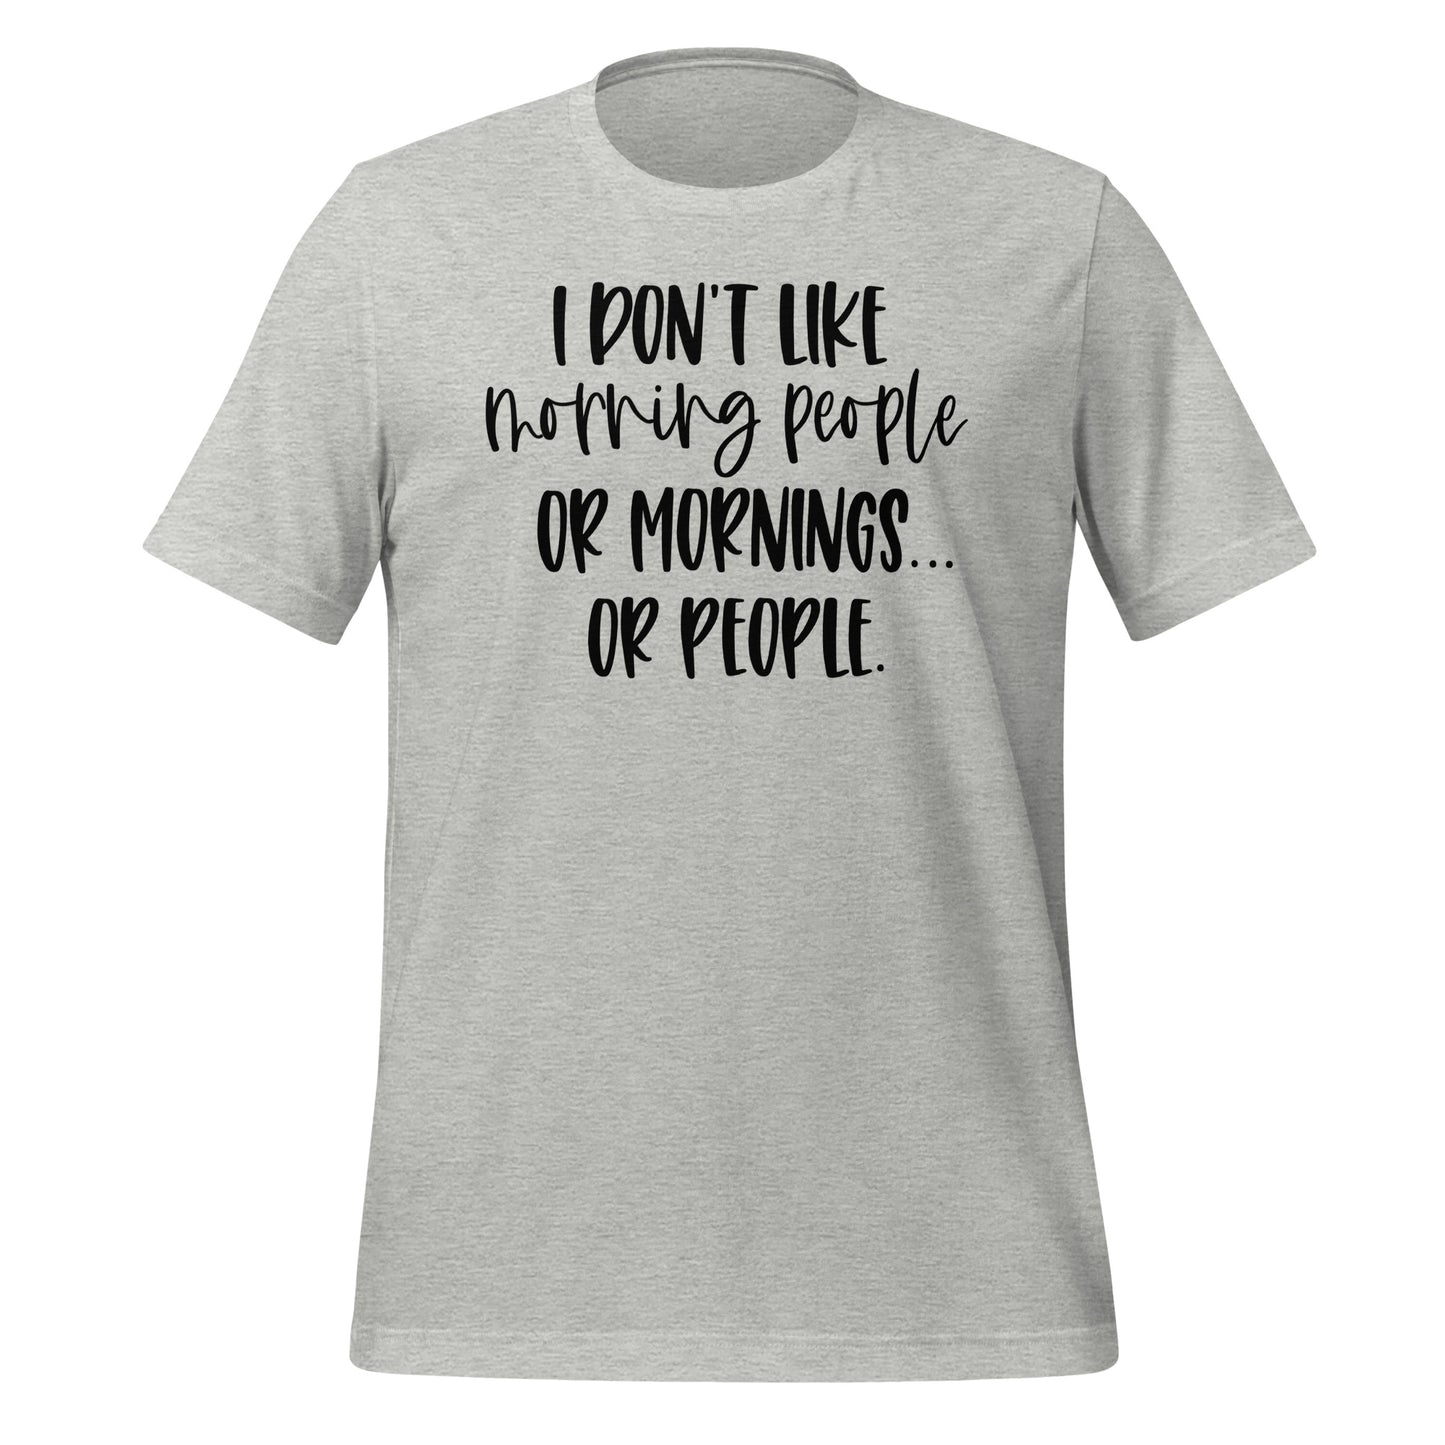 I Don't Like Morning People, Mornings, or People Tshirt